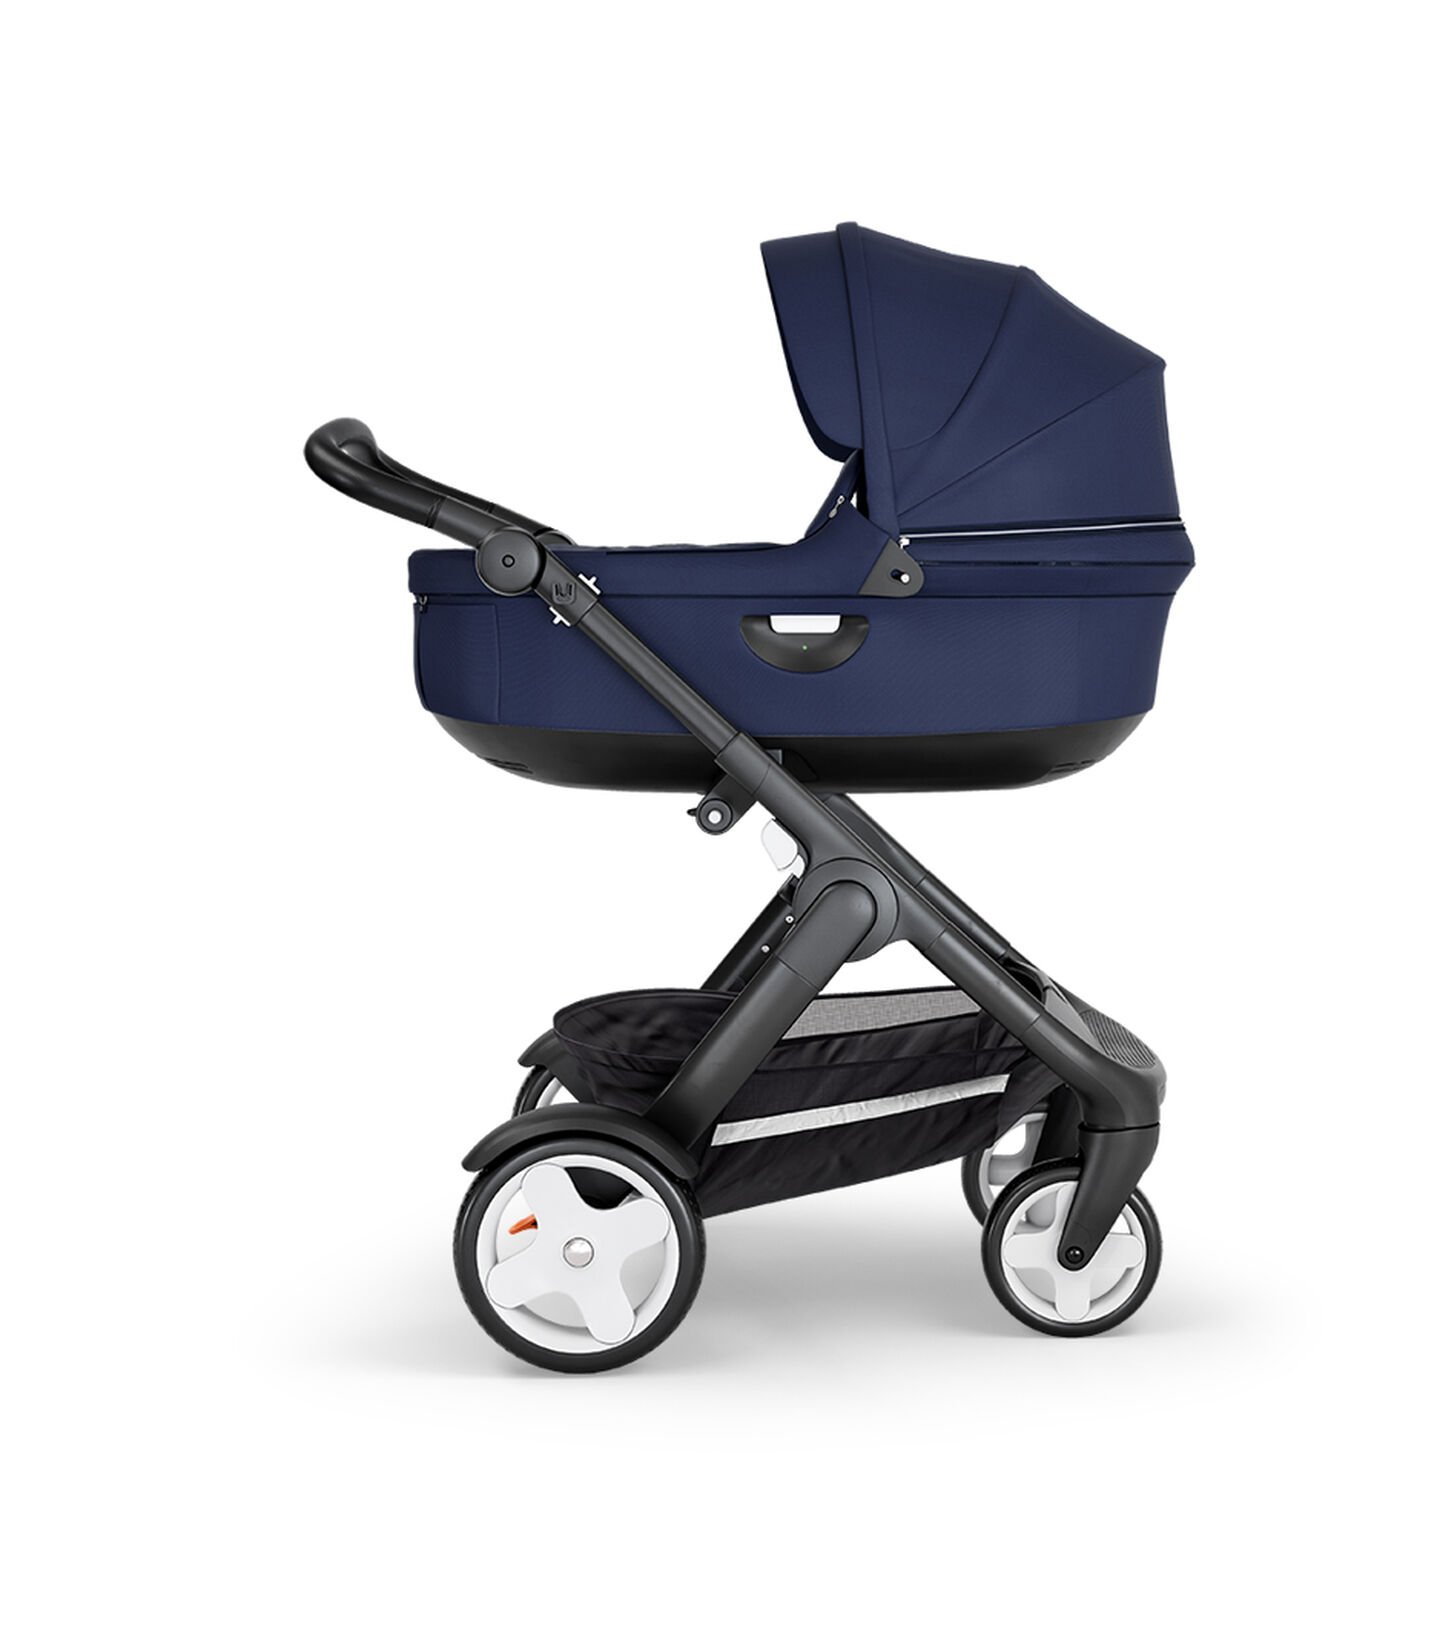 Stokke® Trailz™ with Black Chassis, Black Leatherette and Classic Wheels. Stokke® Stroller Carry Cot, Deep Blue. view 2